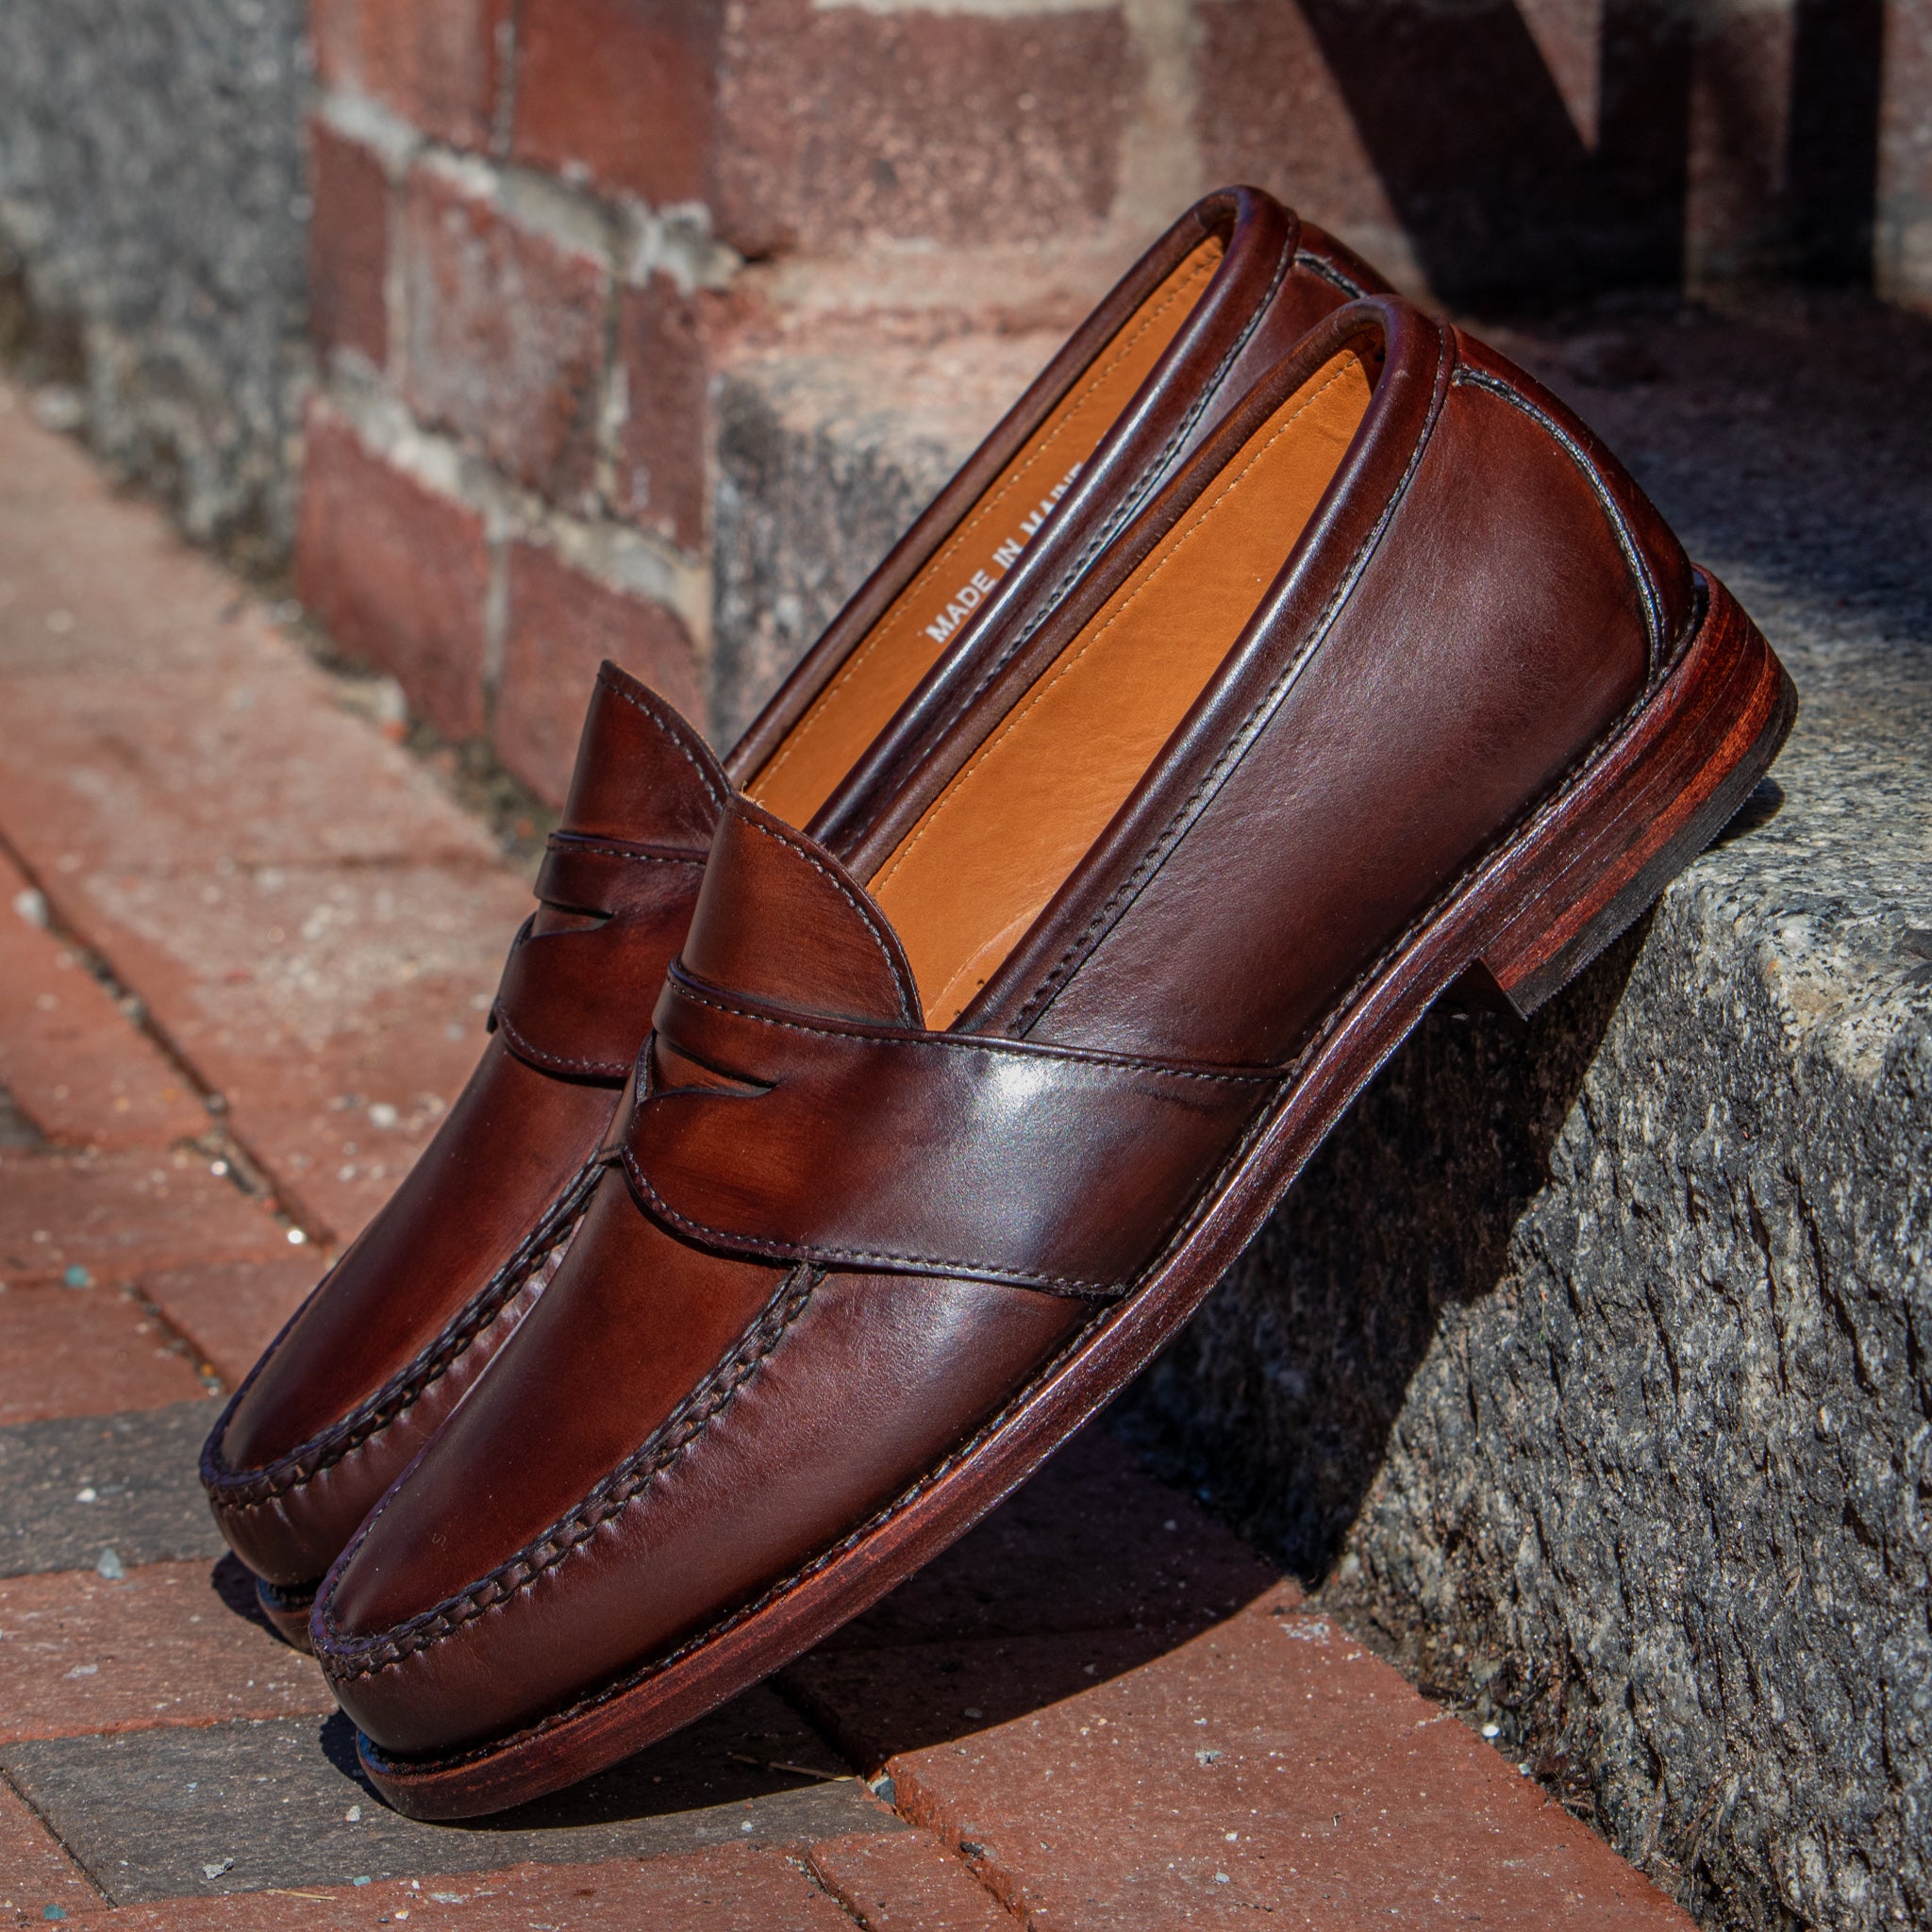 Weltline Loafers - Dark Brown Calf Rancourt Co. | Men's Boots Shoes